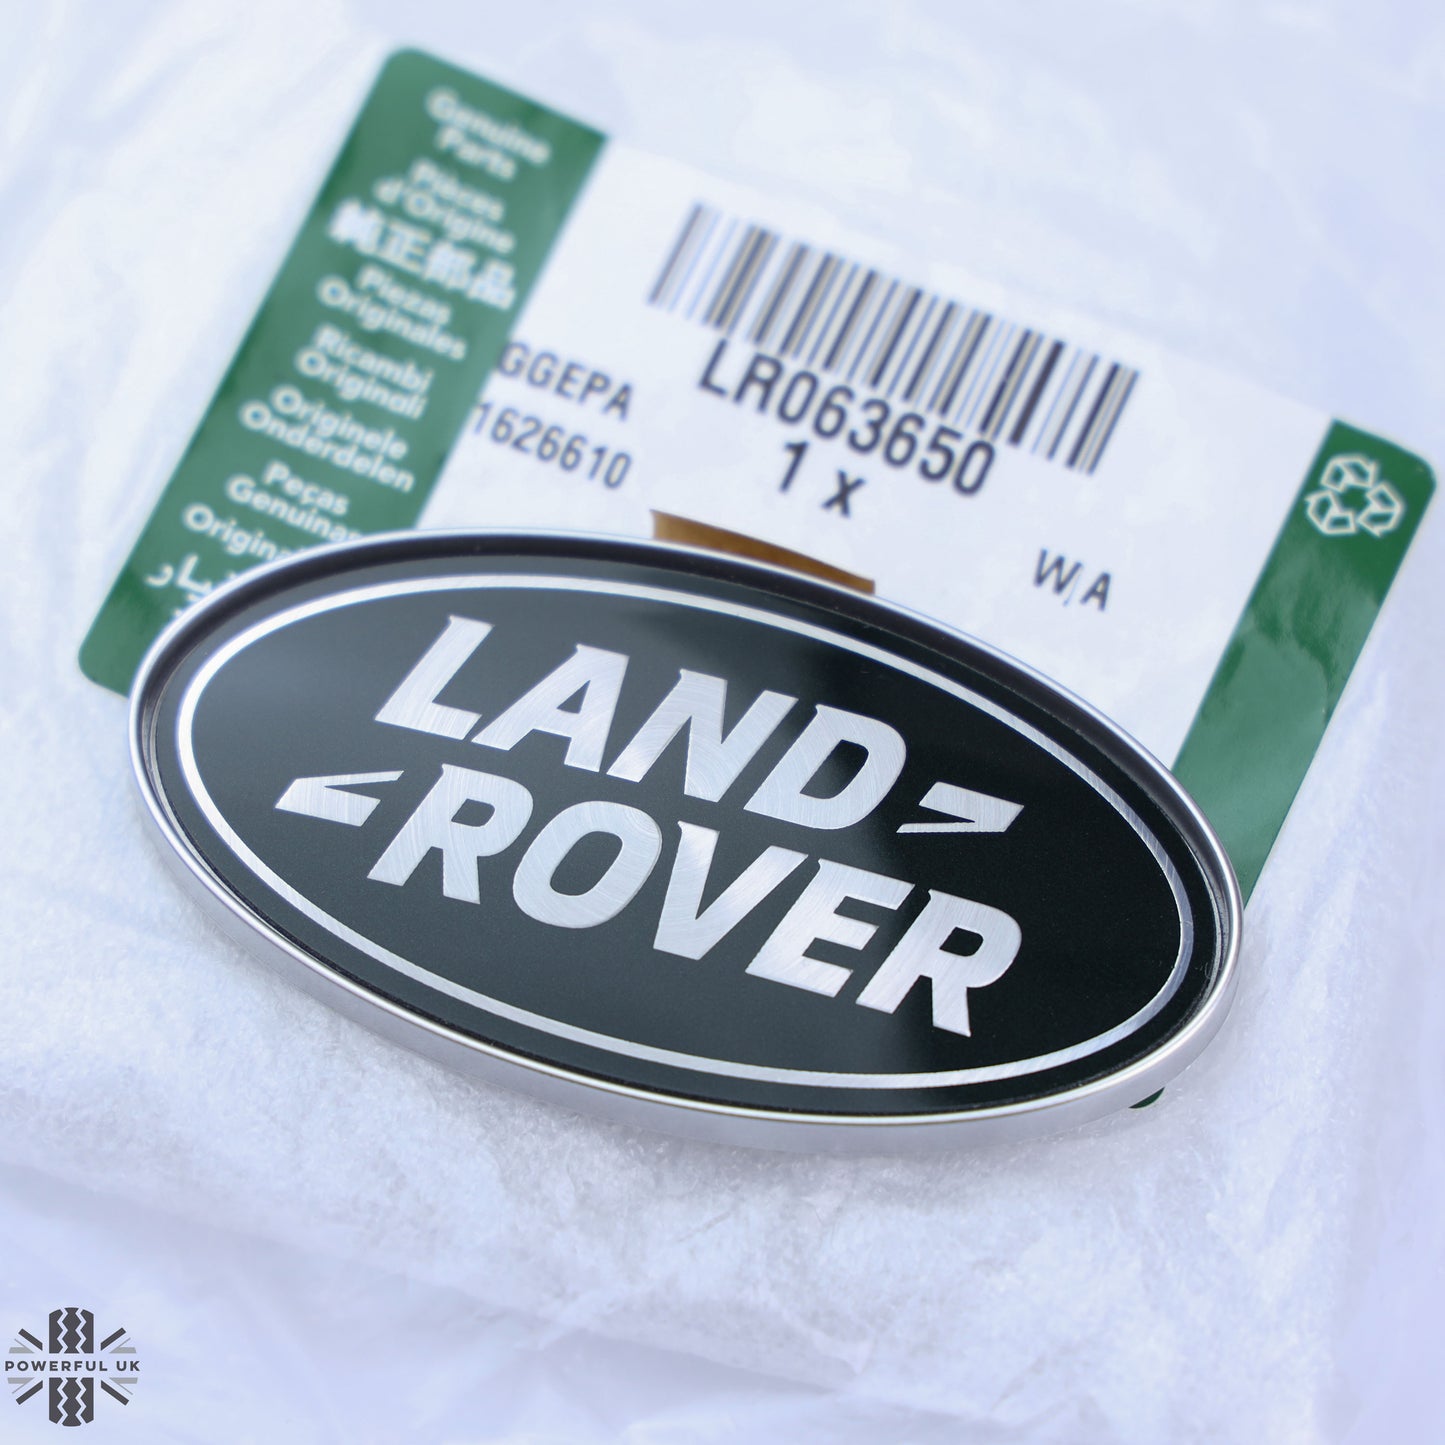 1x Genuine C Pillar Oval Badge for Land Rover Discovery Sport